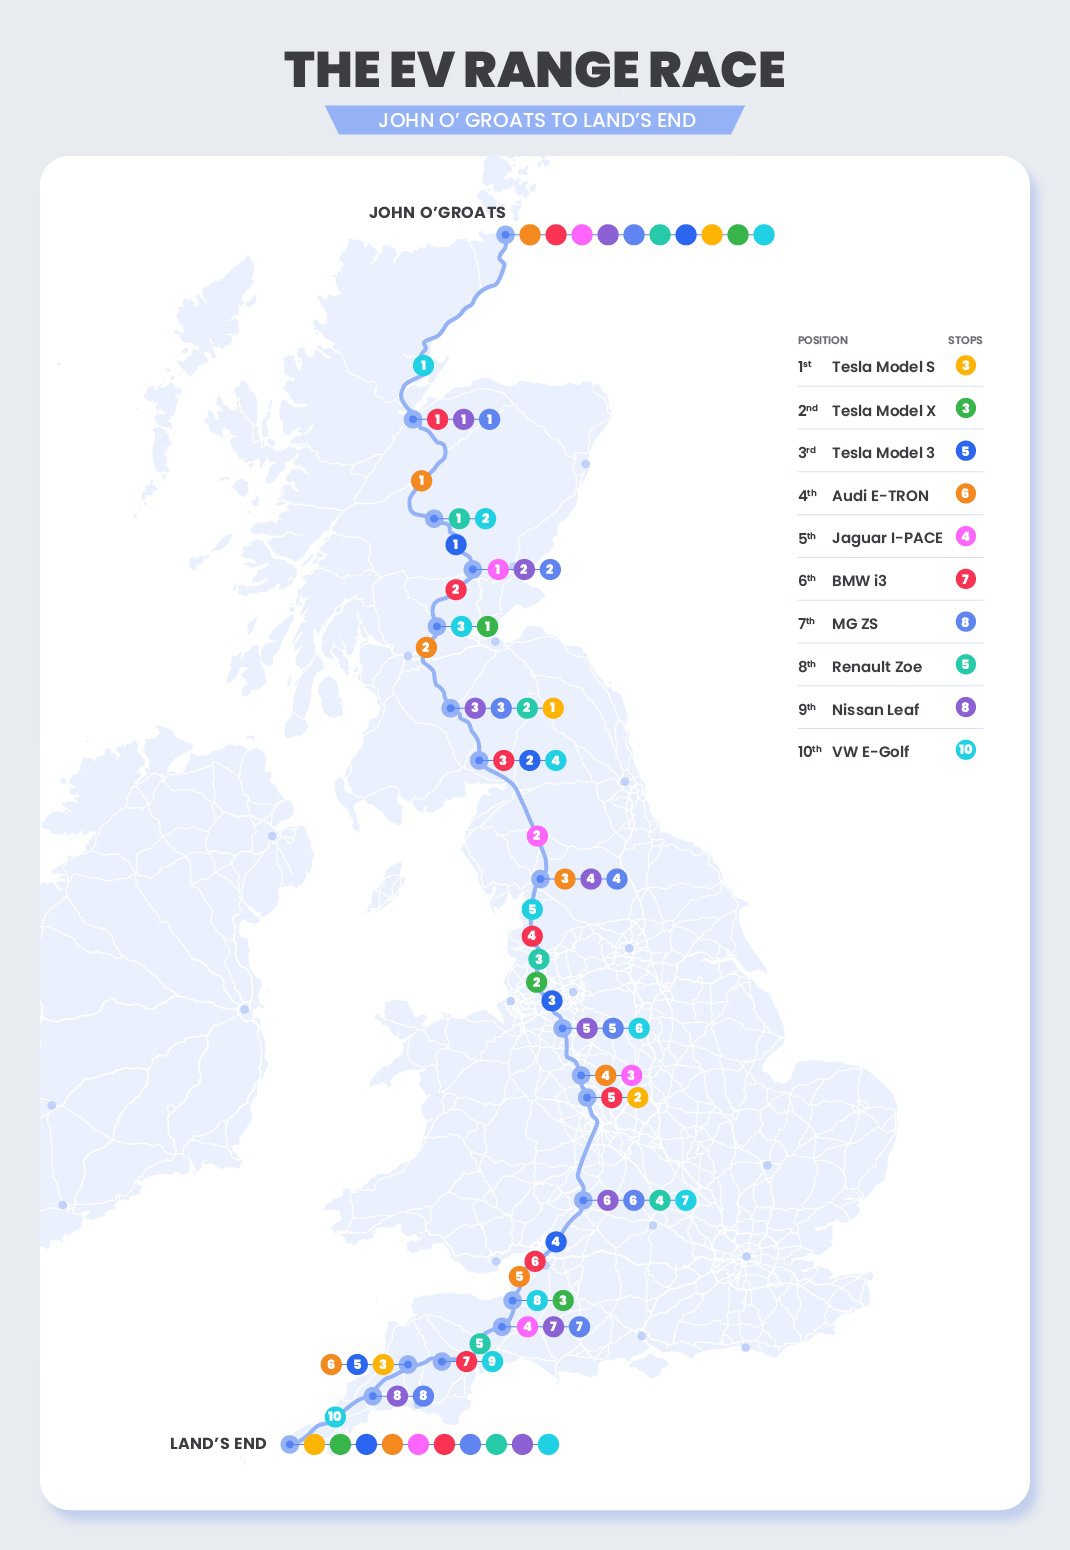 Electric vehicle journey times